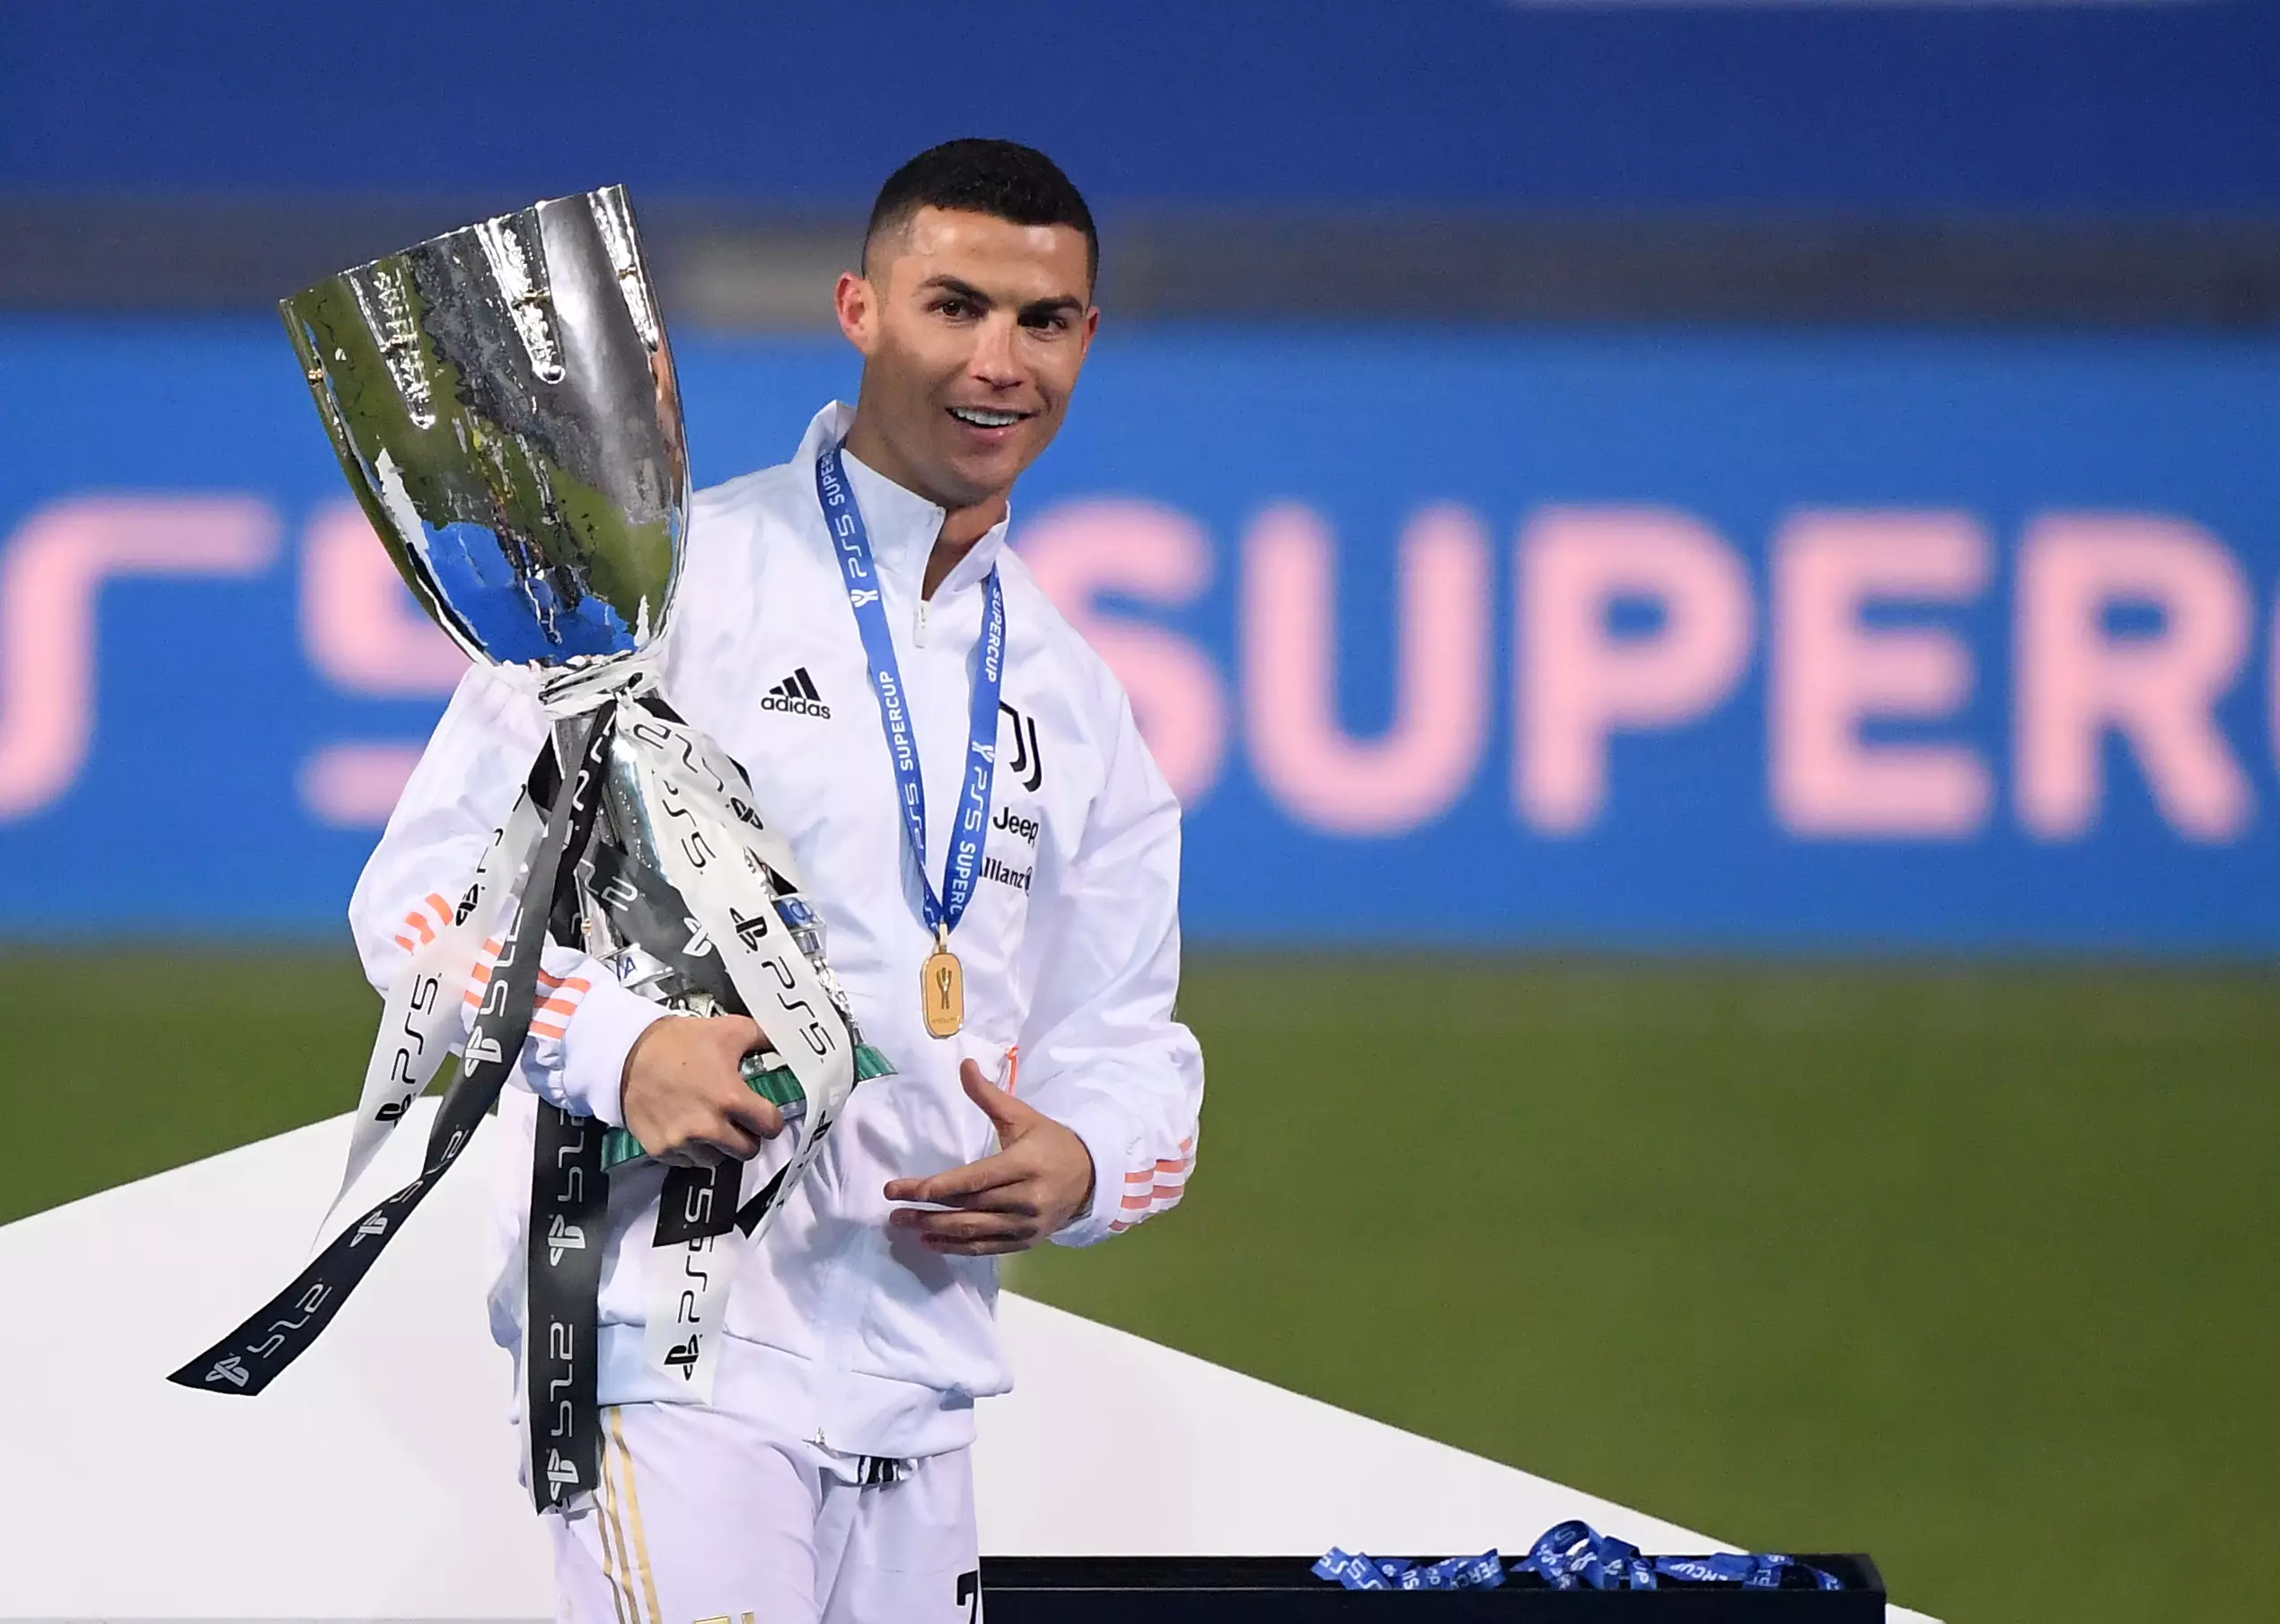 Ronaldo, here with the Supercoppa, has picked up another award. Image: PA Images